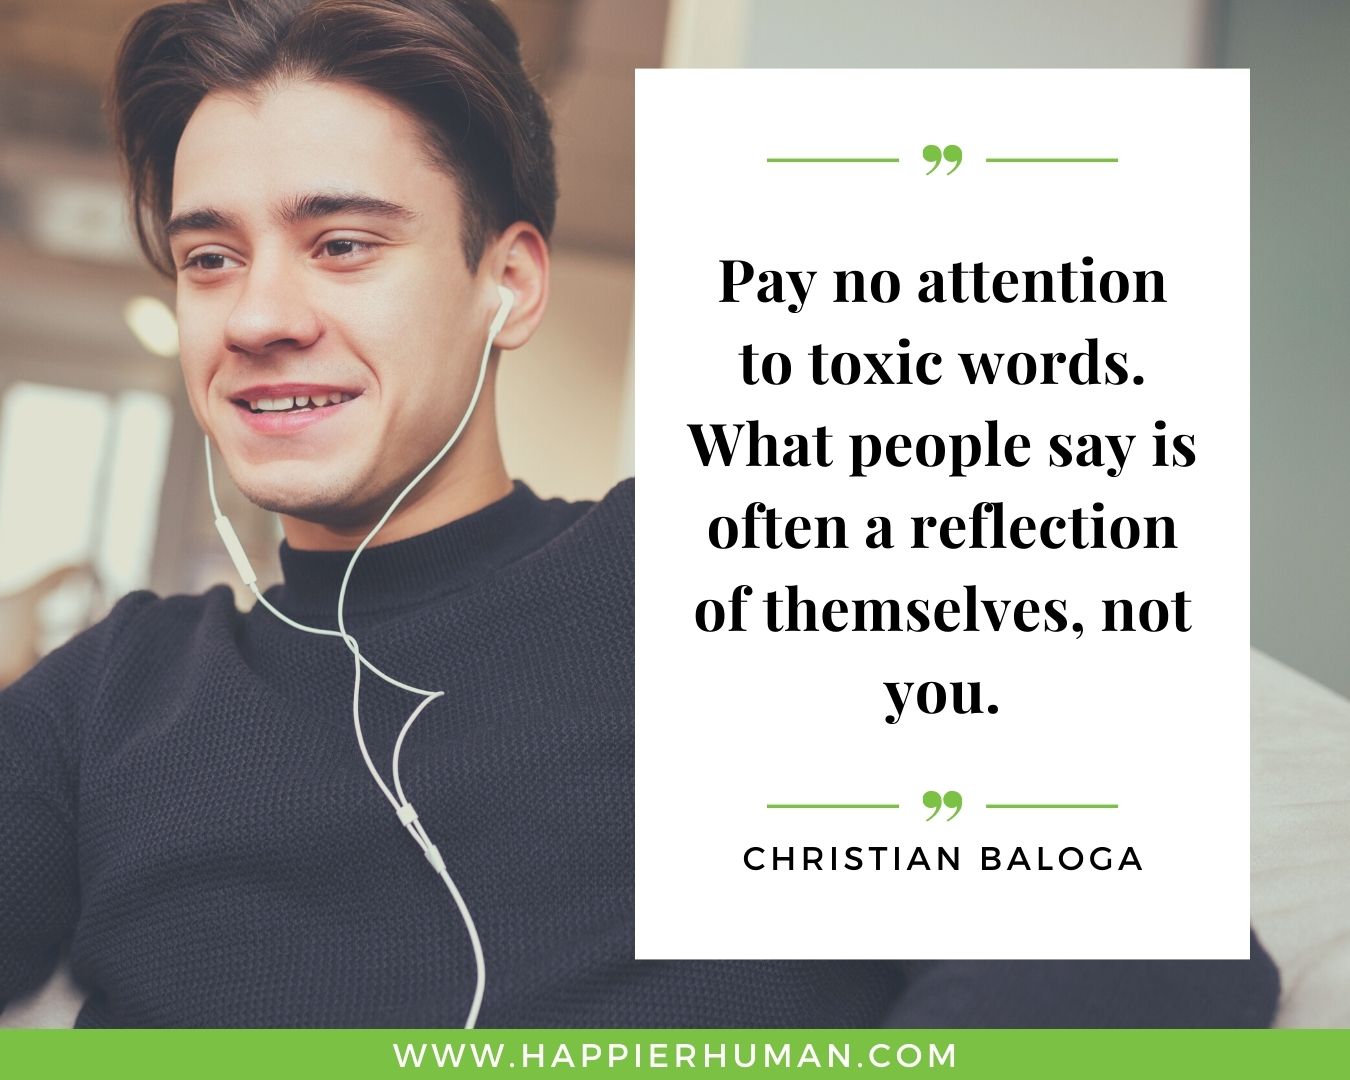 Toxic People Quotes - “Pay no attention to toxic words. What people say is often a reflection of themselves, not you.” – Christian Baloga